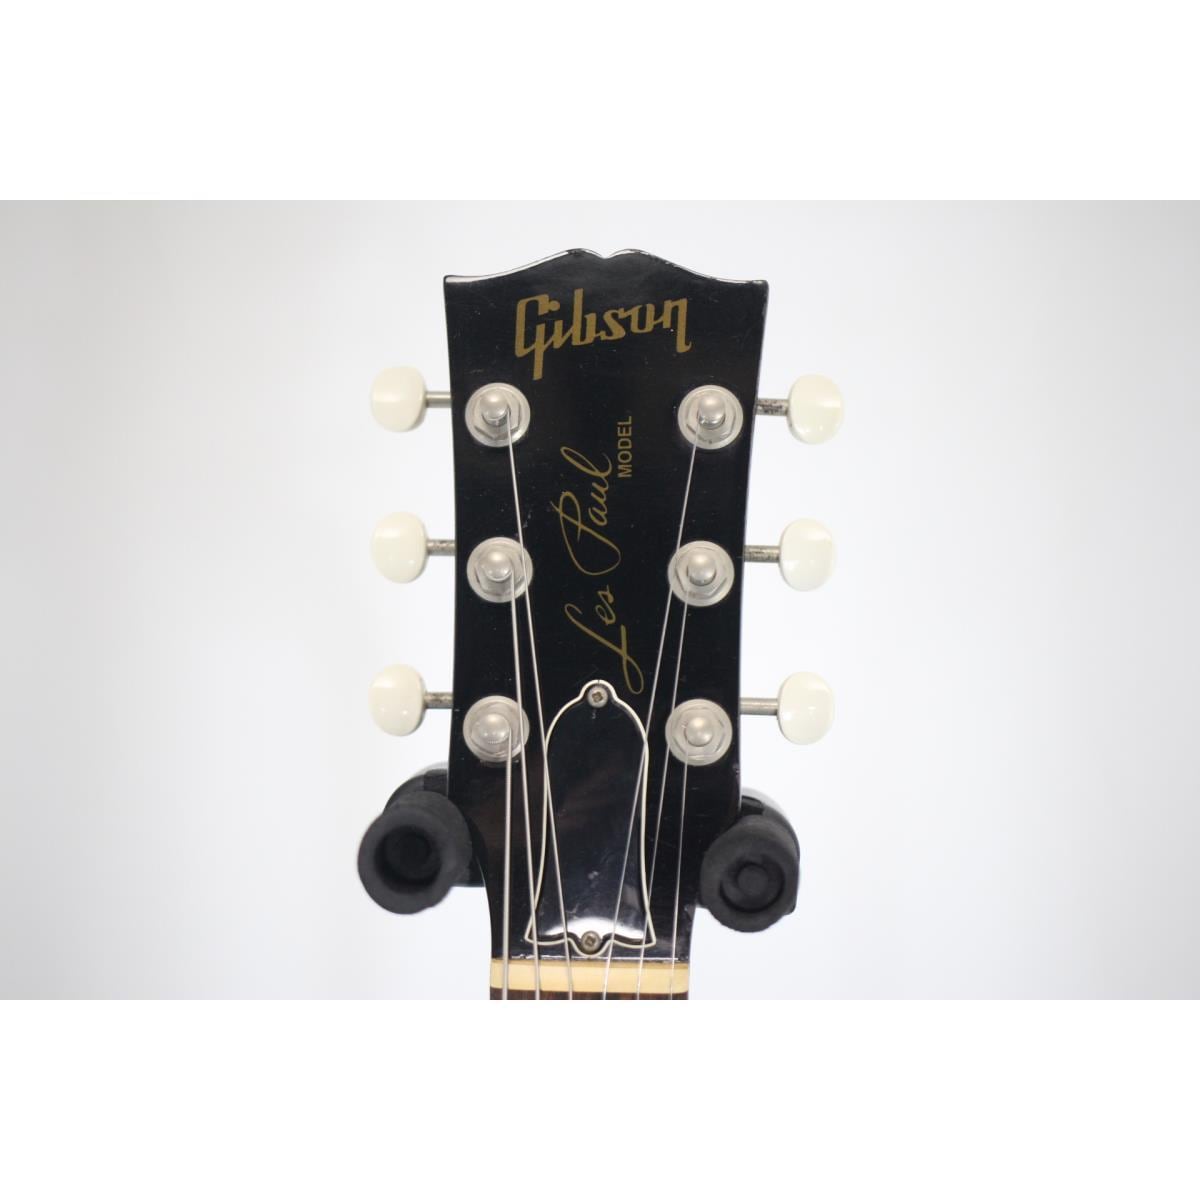 GIBSON LES PAUL SPECIAL DC